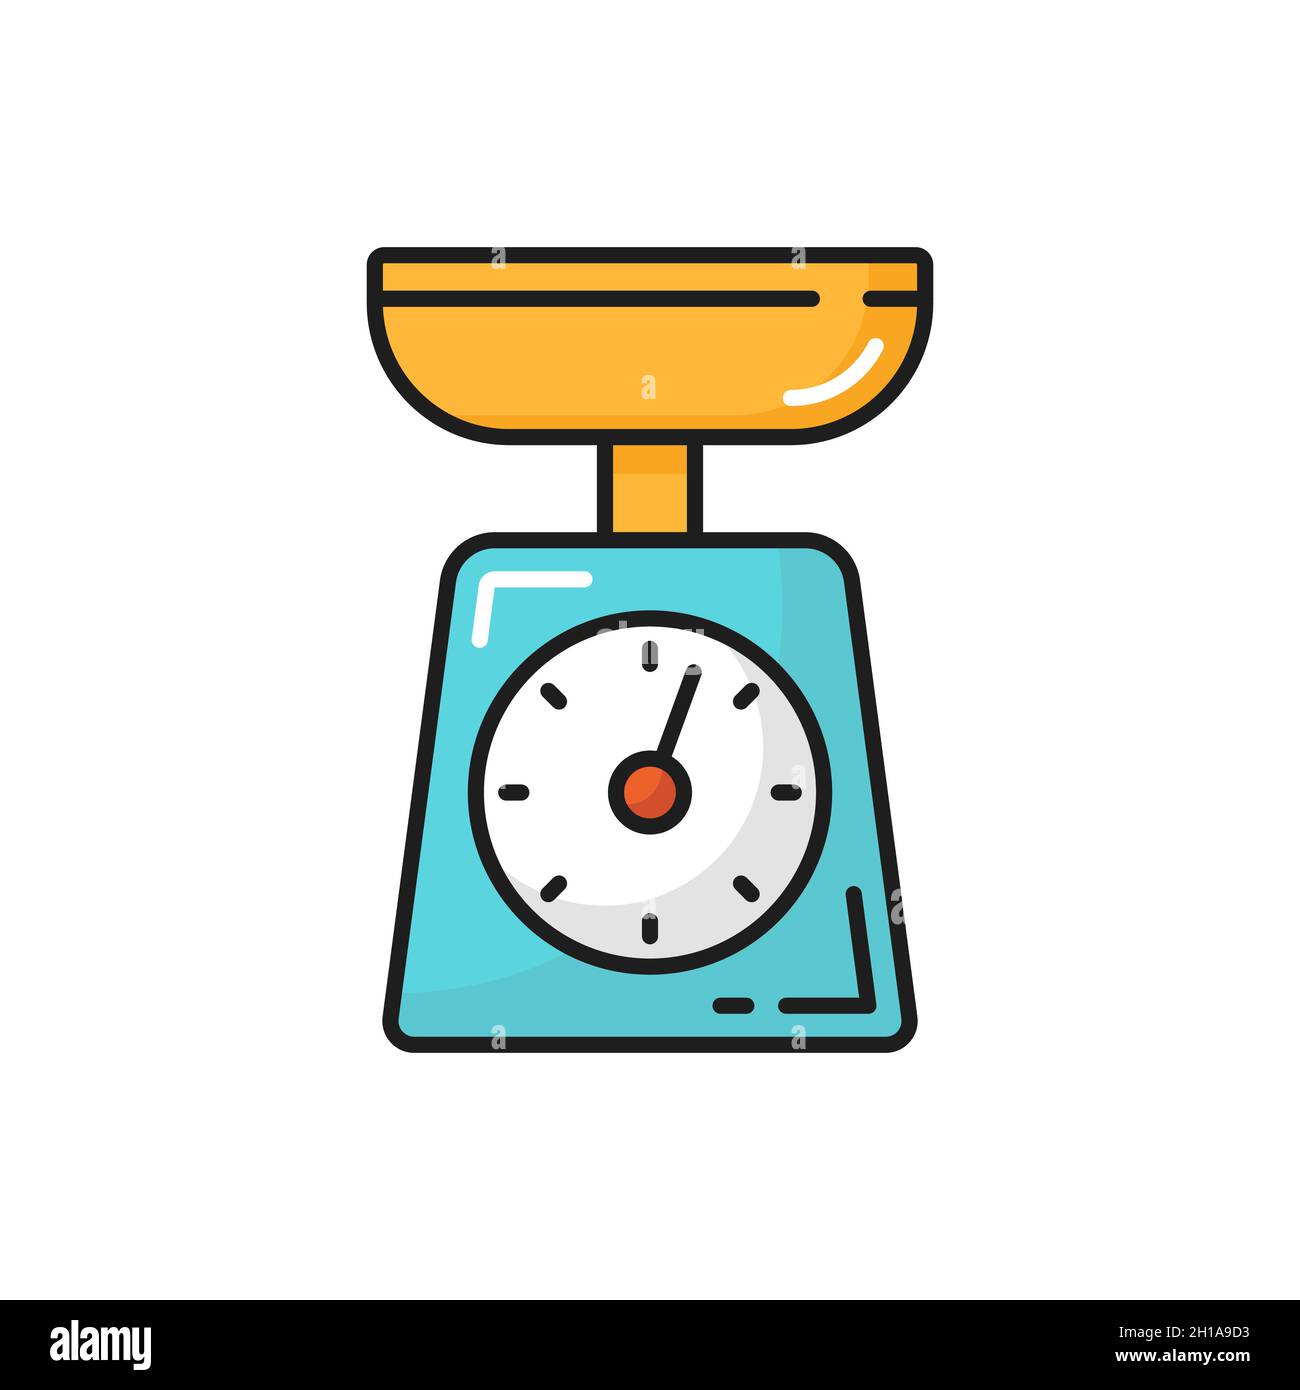 https://c8.alamy.com/comp/2H1A9D3/kitchen-scales-food-measuring-device-isolated-color-line-icon-vector-weighing-libra-appliances-culinary-measure-tool-food-measuring-device-kitchen-2H1A9D3.jpg